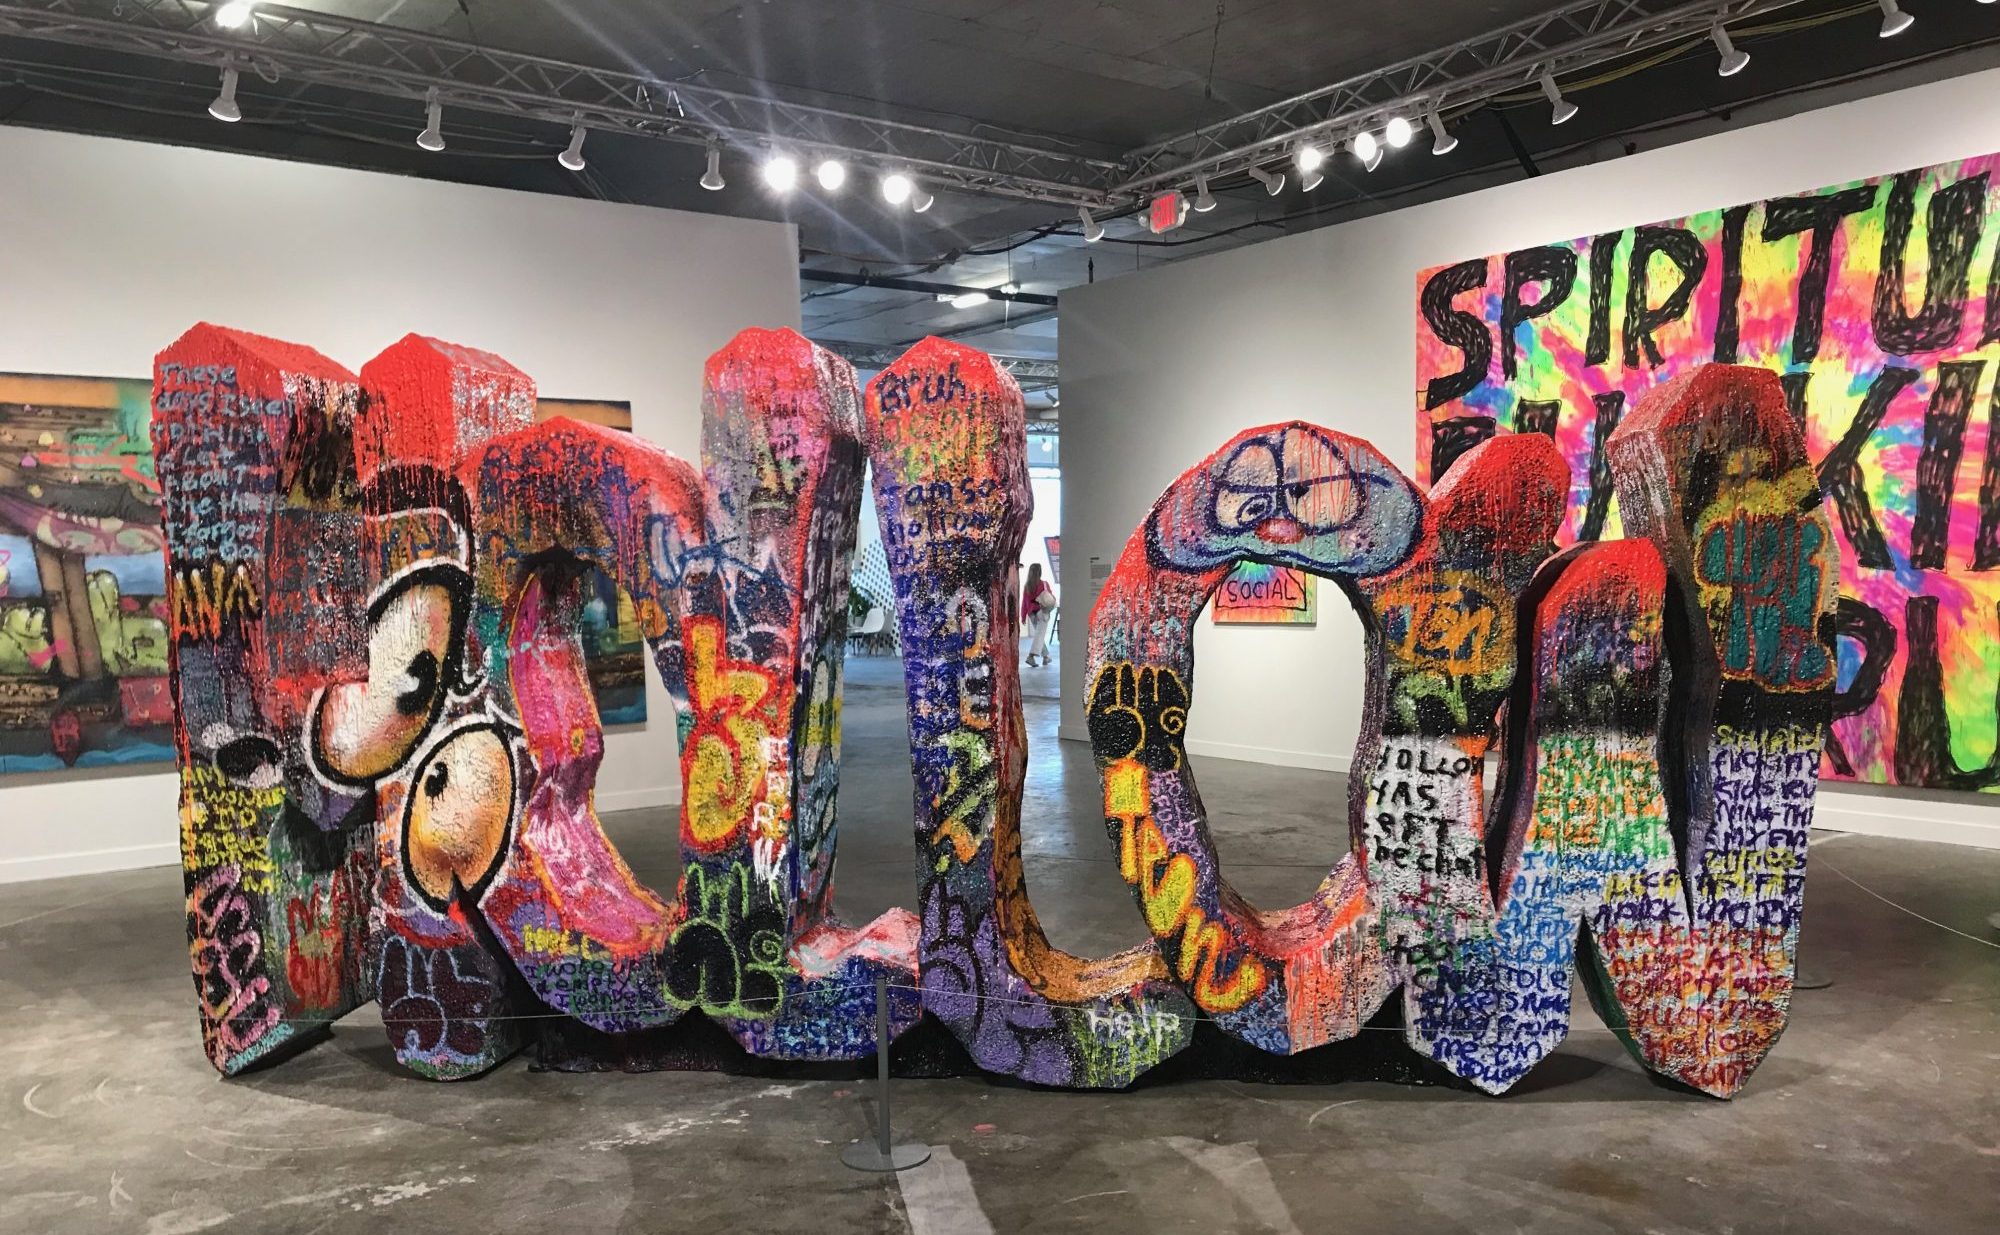 The world's largest street art exhibition arrives in Williamsburg